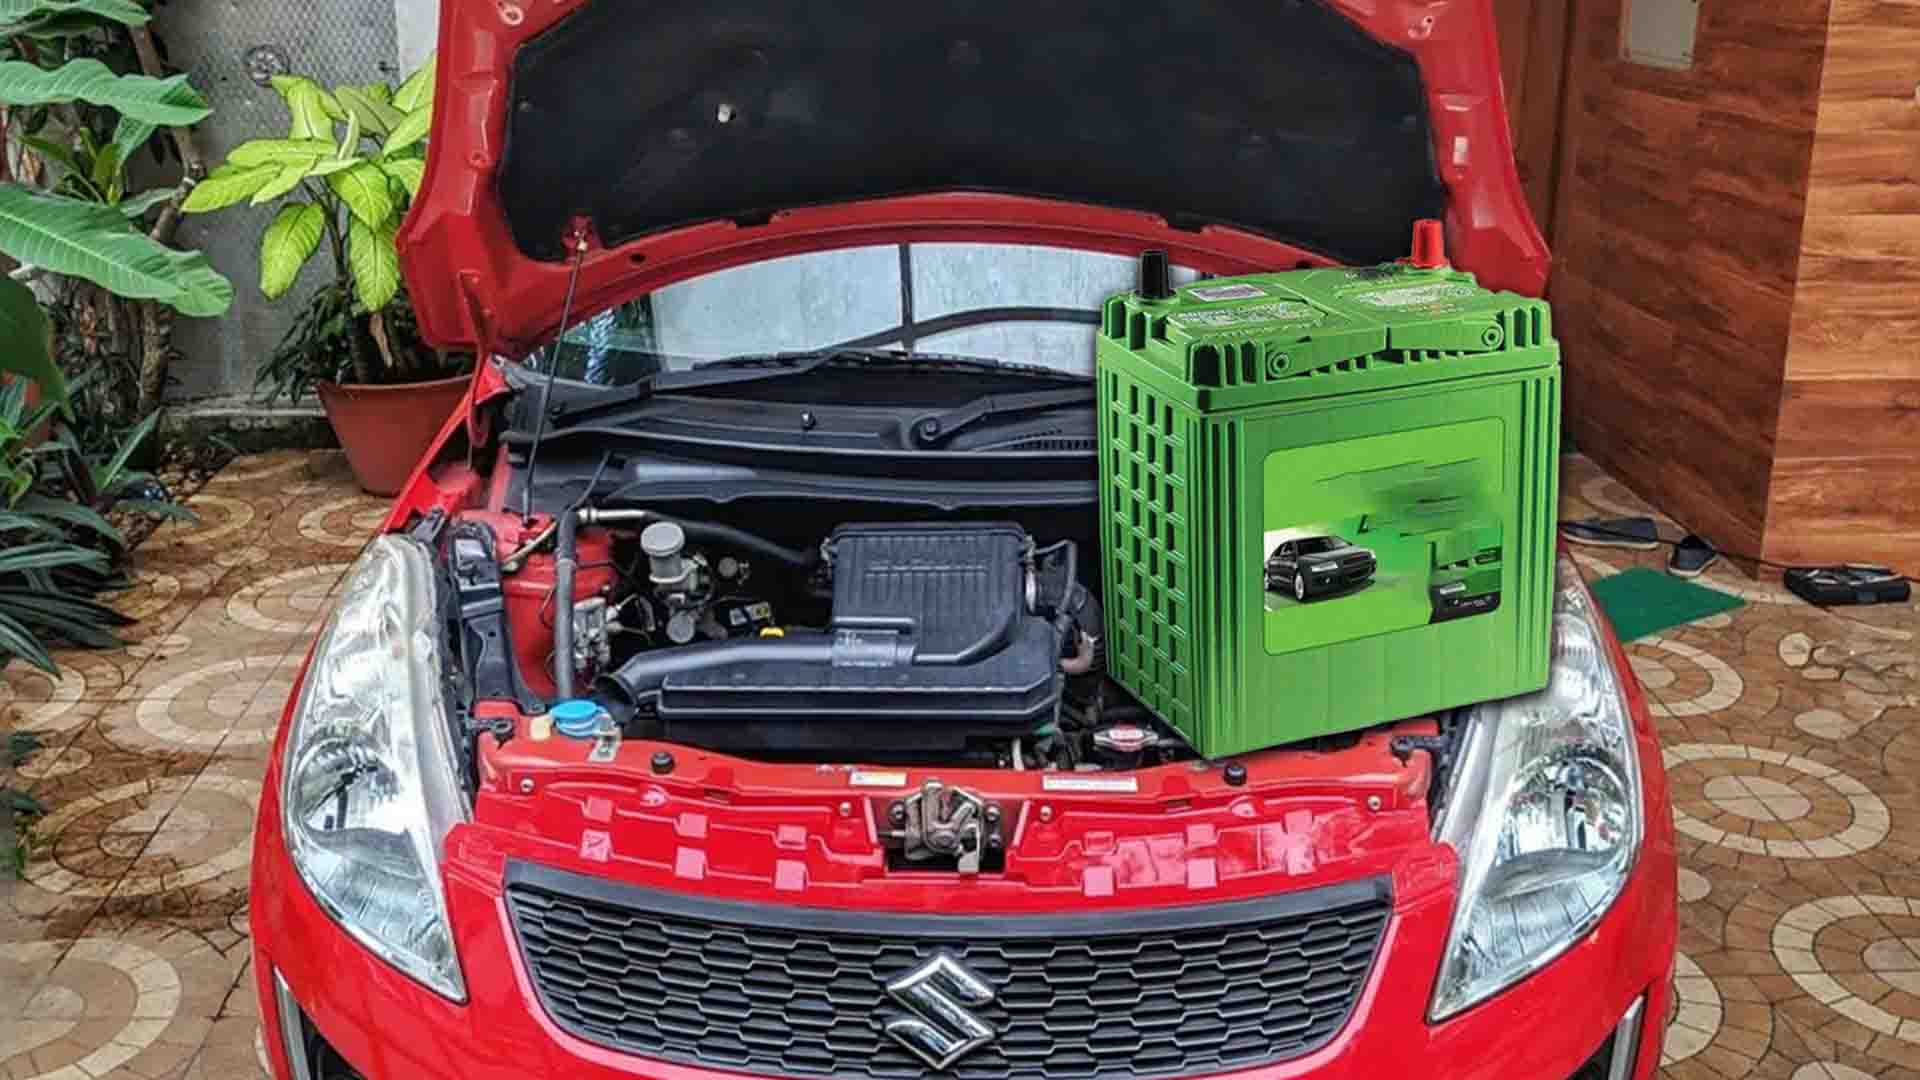 Car Battery Down Not Starting A Dead Battery Troubleshooting Guide solve gbrmotors